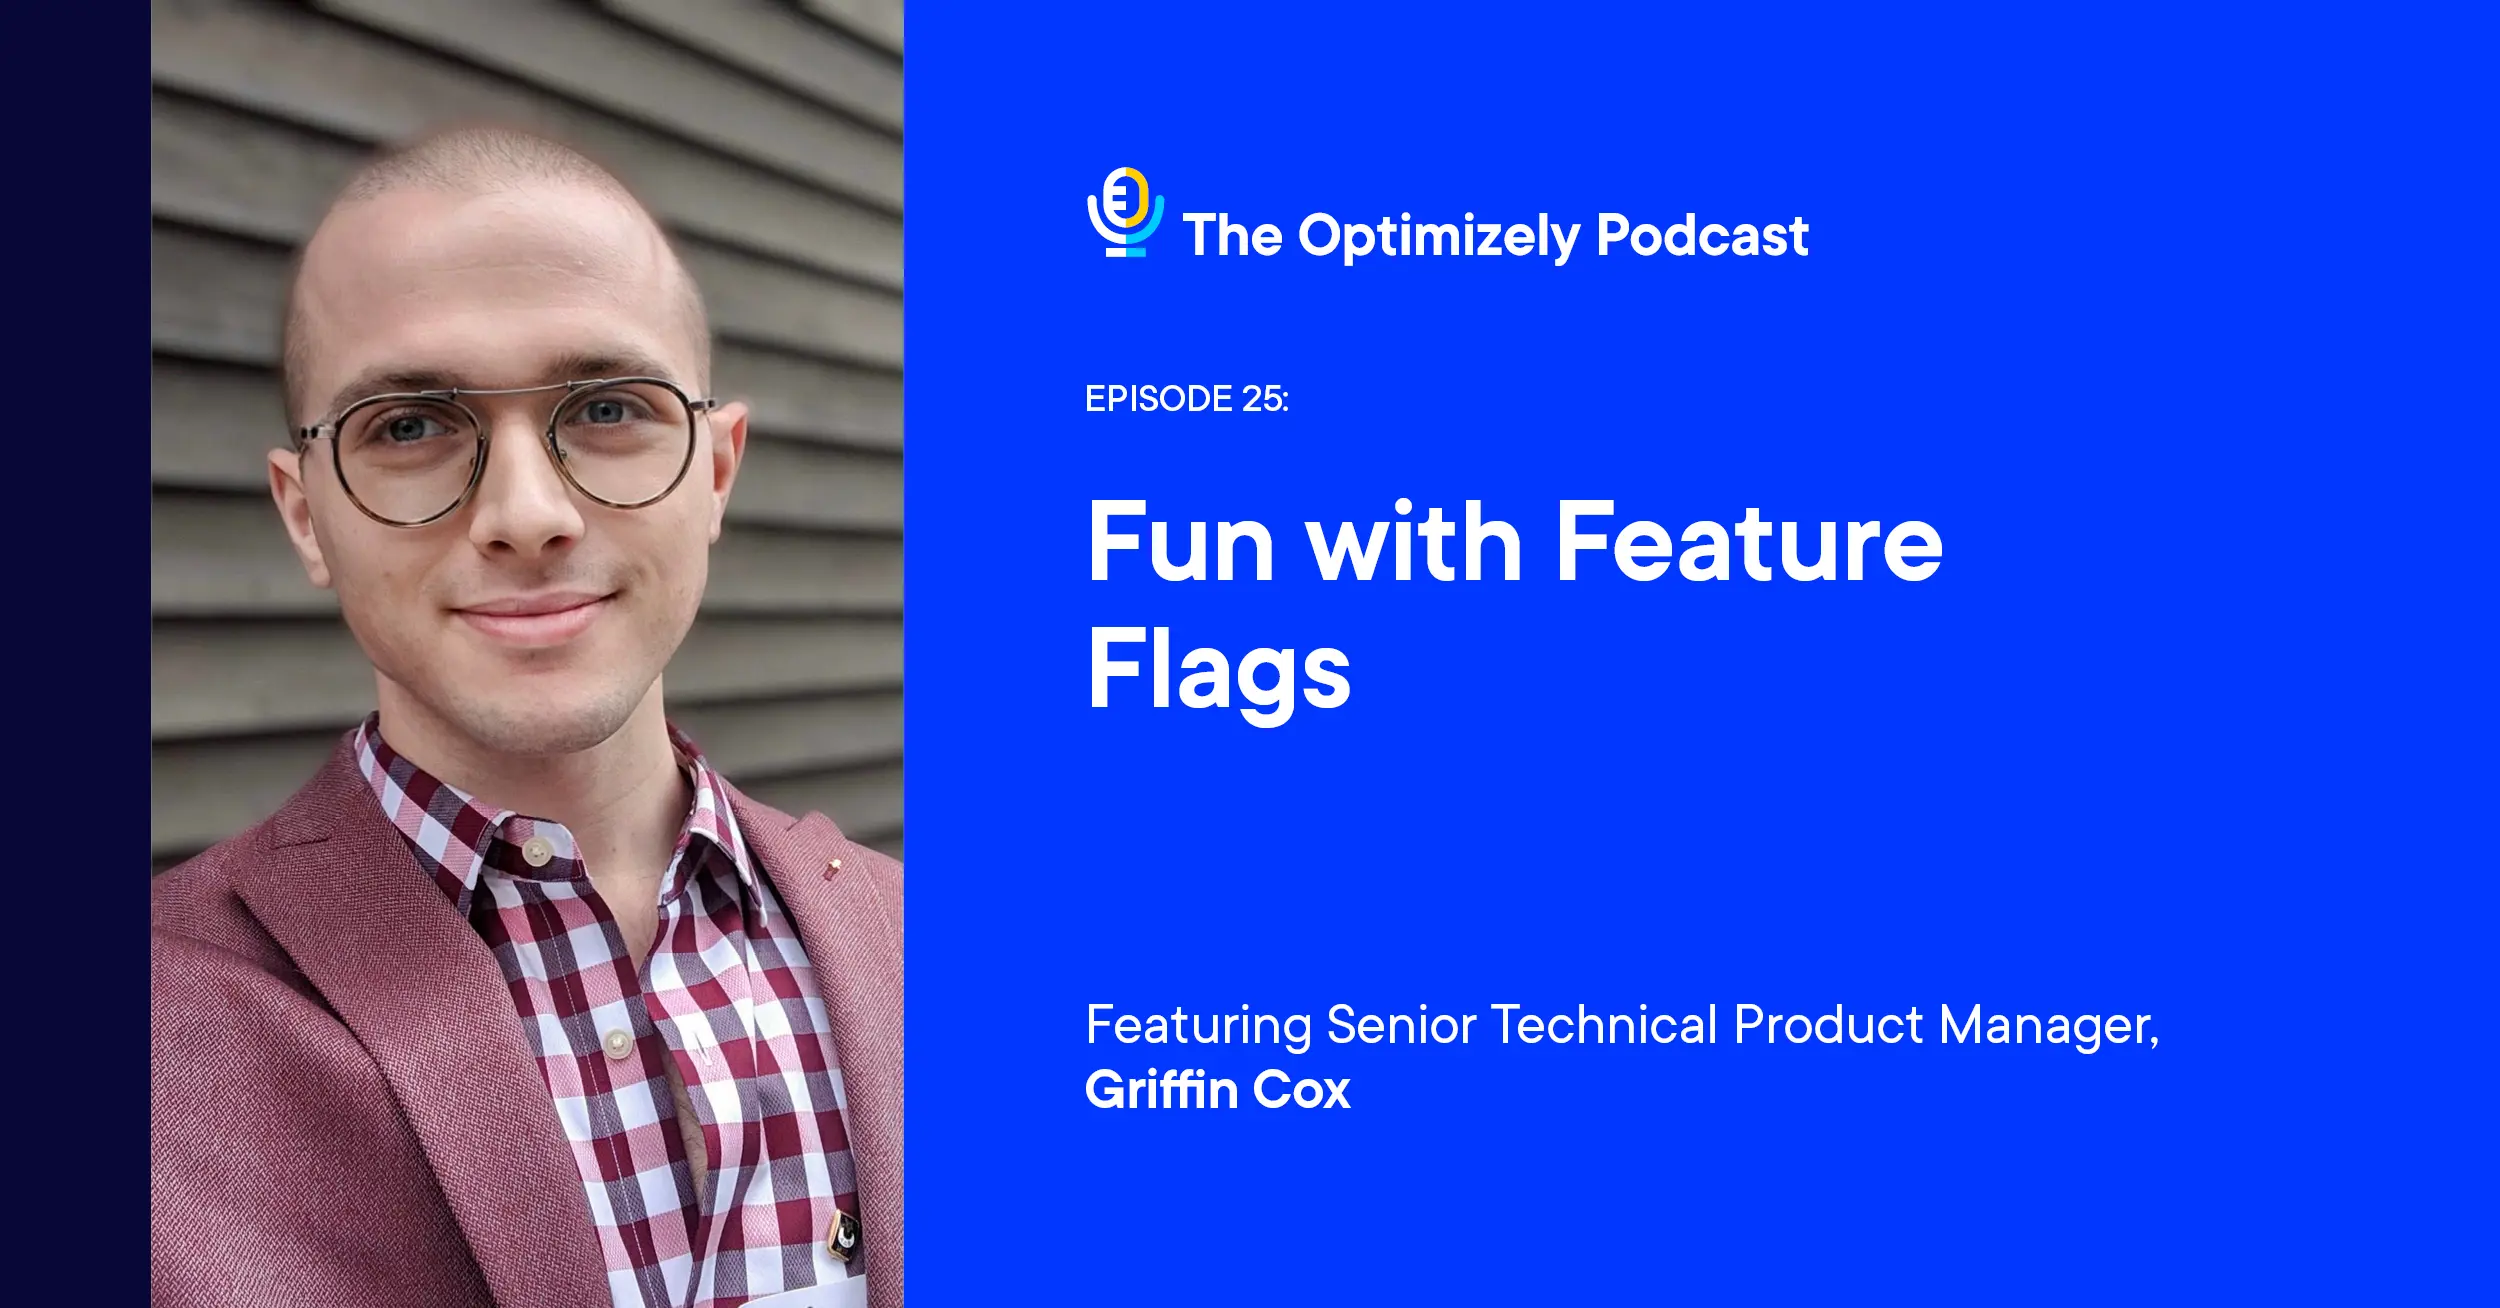 The Optimizely Podcast - episode 25: Fun with Feature Flags